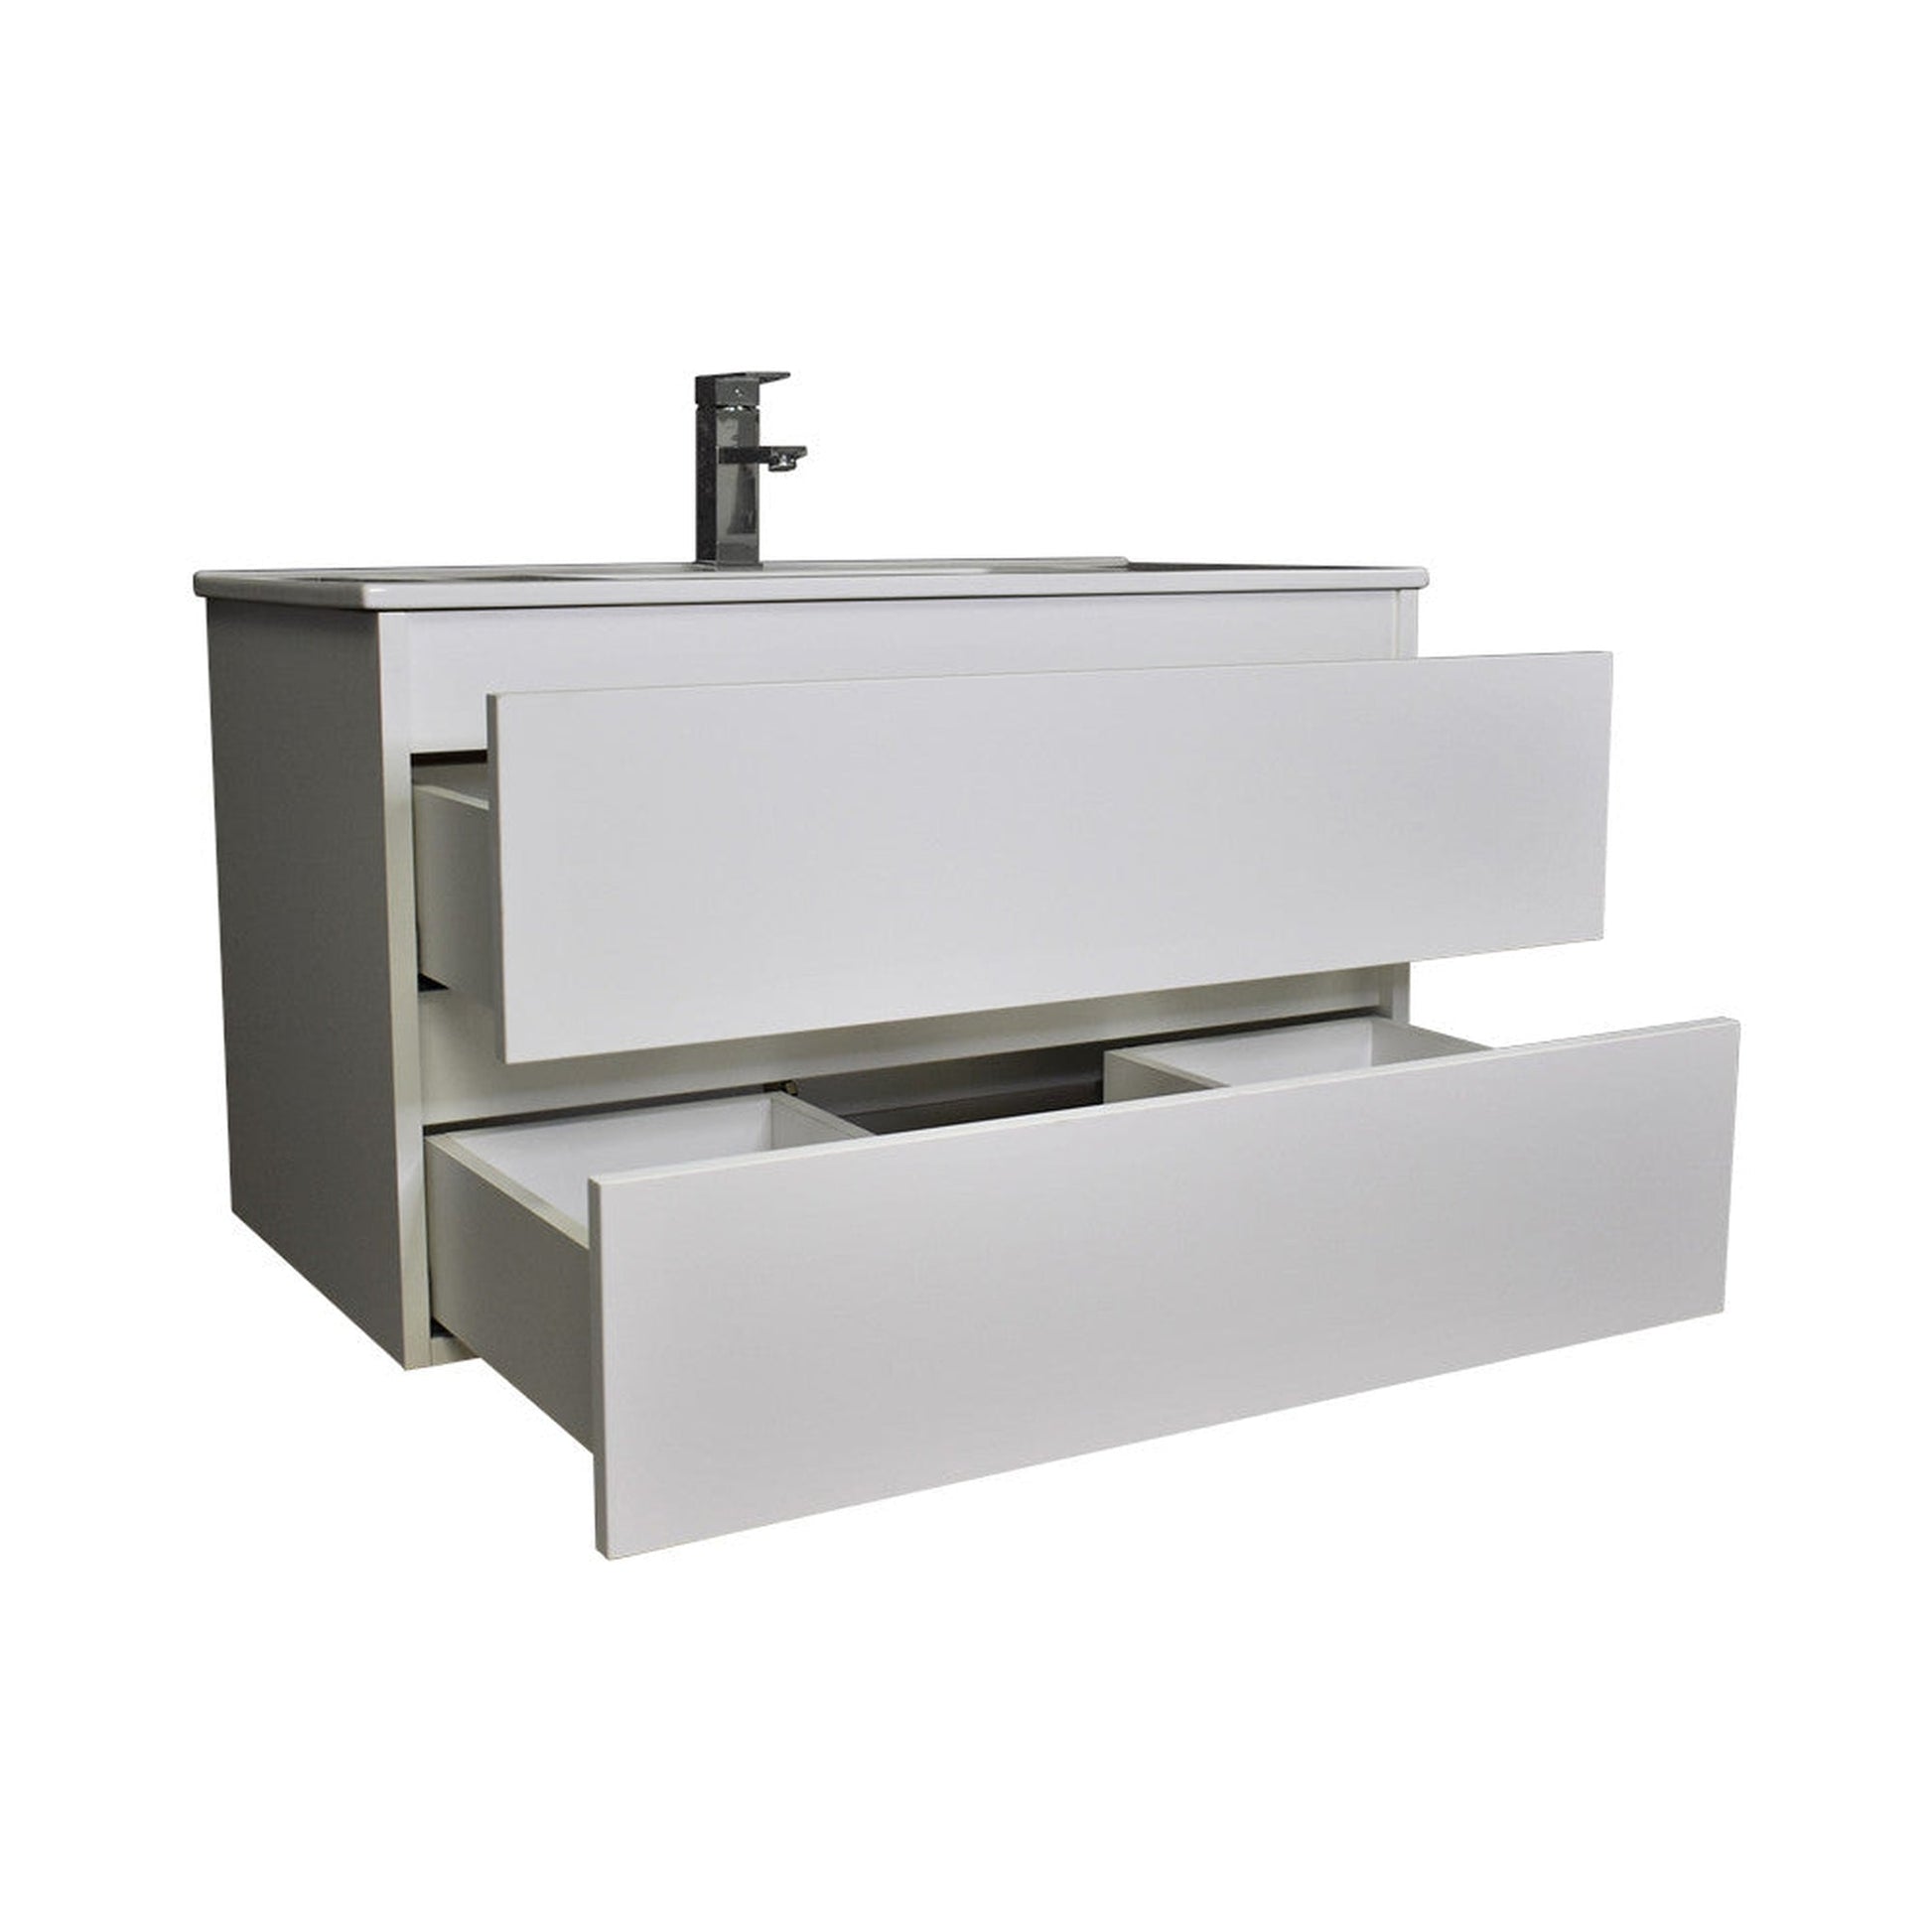 Volpa USA Salt 36" x 18" White Wall-Mounted Floating Bathroom Vanity With Drawers, Integrated Porcelain Ceramic Top and Integrated Ceramic Sink